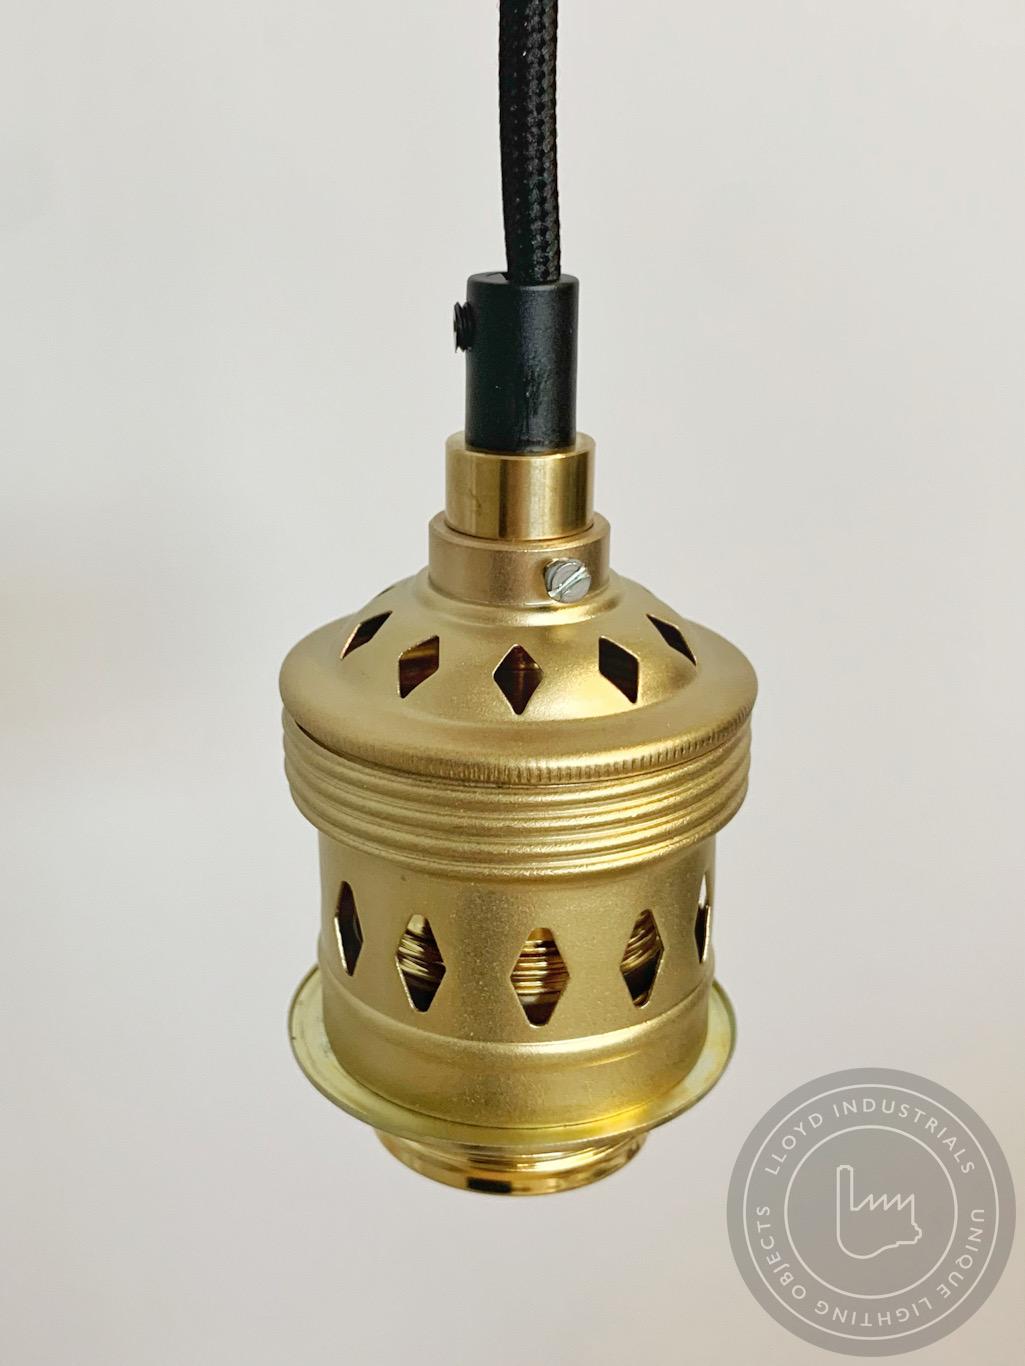 UPCYCLED LAMP FITTING
In the past, factory lamps were equipped with large E40 brass fittings. The casing of these old fittings is more than 70 years old. By blasting and polishing it it looks like new. We have replaced the interior with a new